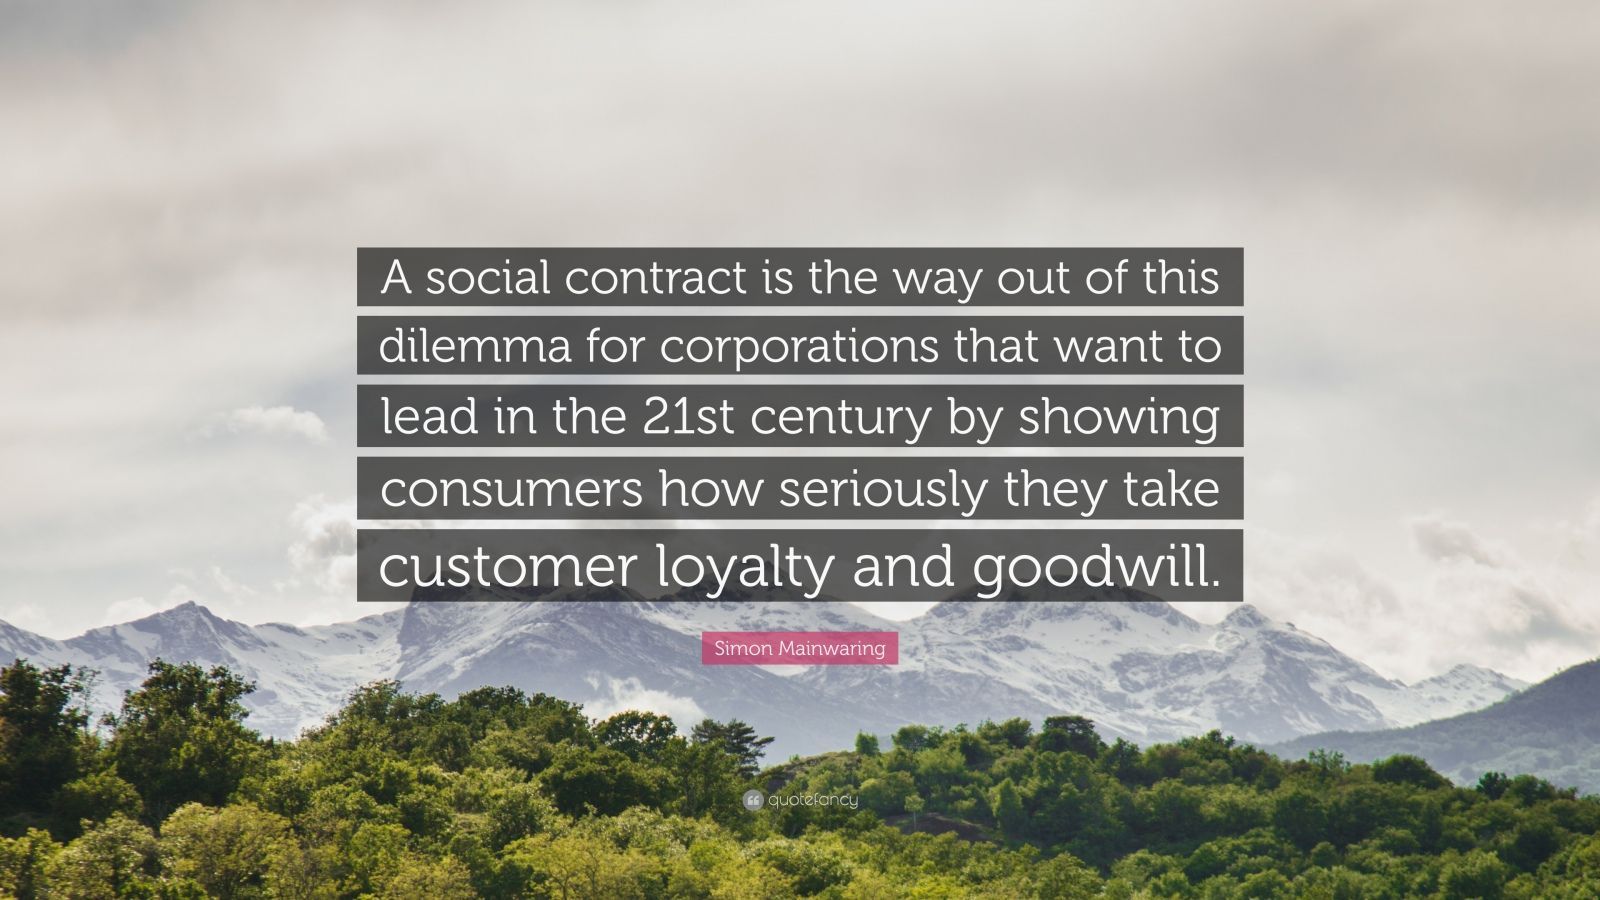 Simon Mainwaring Quote: “A social contract is the way out of this dilemma for corporations that want to lead in the 21st century by showing consu.” (7 wallpaper)